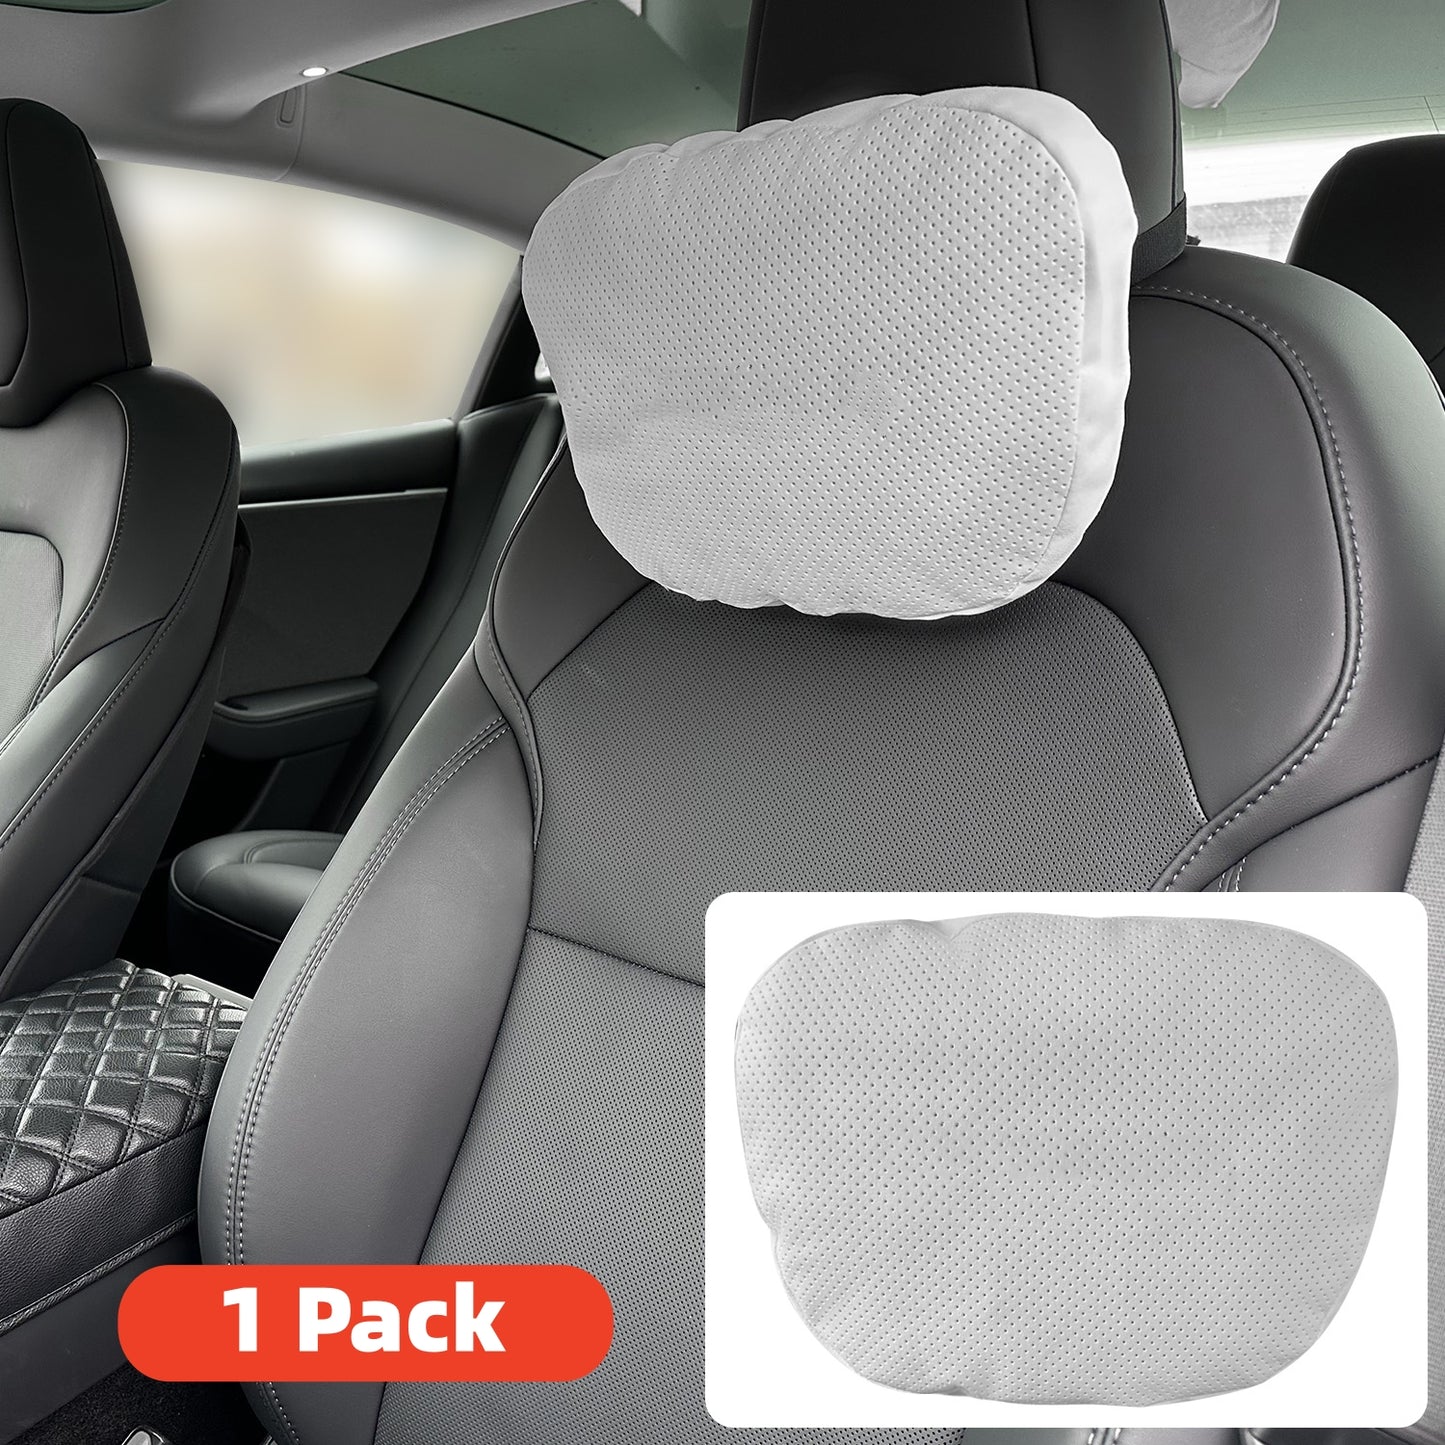 Headrest Pillow for Model 3 highland/3/Y/S/X - Suede Car Neck Support –  Arcoche